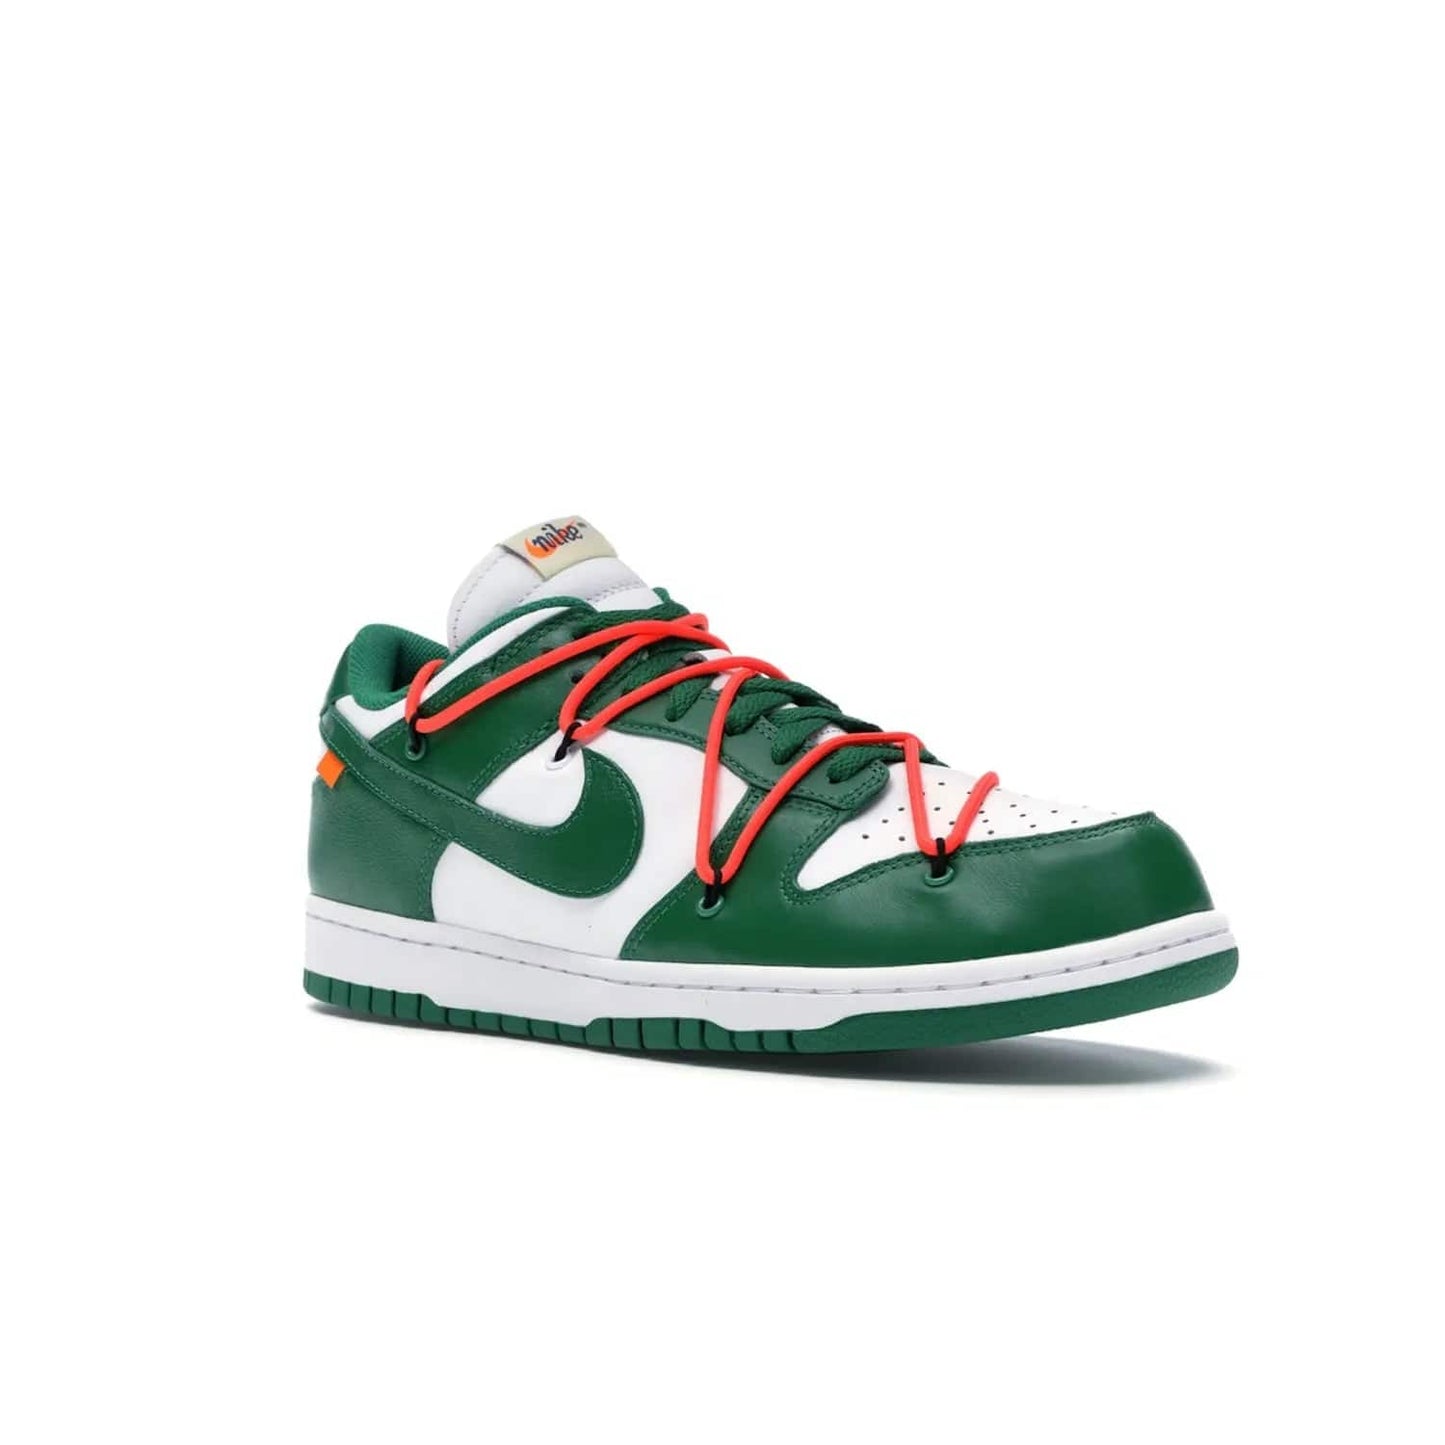 Nike Dunk Low Off-White Pine Green - Image 5 - Only at www.BallersClubKickz.com - The Nike Dunk Low Off-White Pine Green combines classic 1980s style with modern-day design. Featuring white leather uppers and pine green overlays, these classic kicks feature secondary lacing system, zip-ties and signature Off-White text. Releasing in December 2019, these shoes are a timeless classic for any wardrobe.